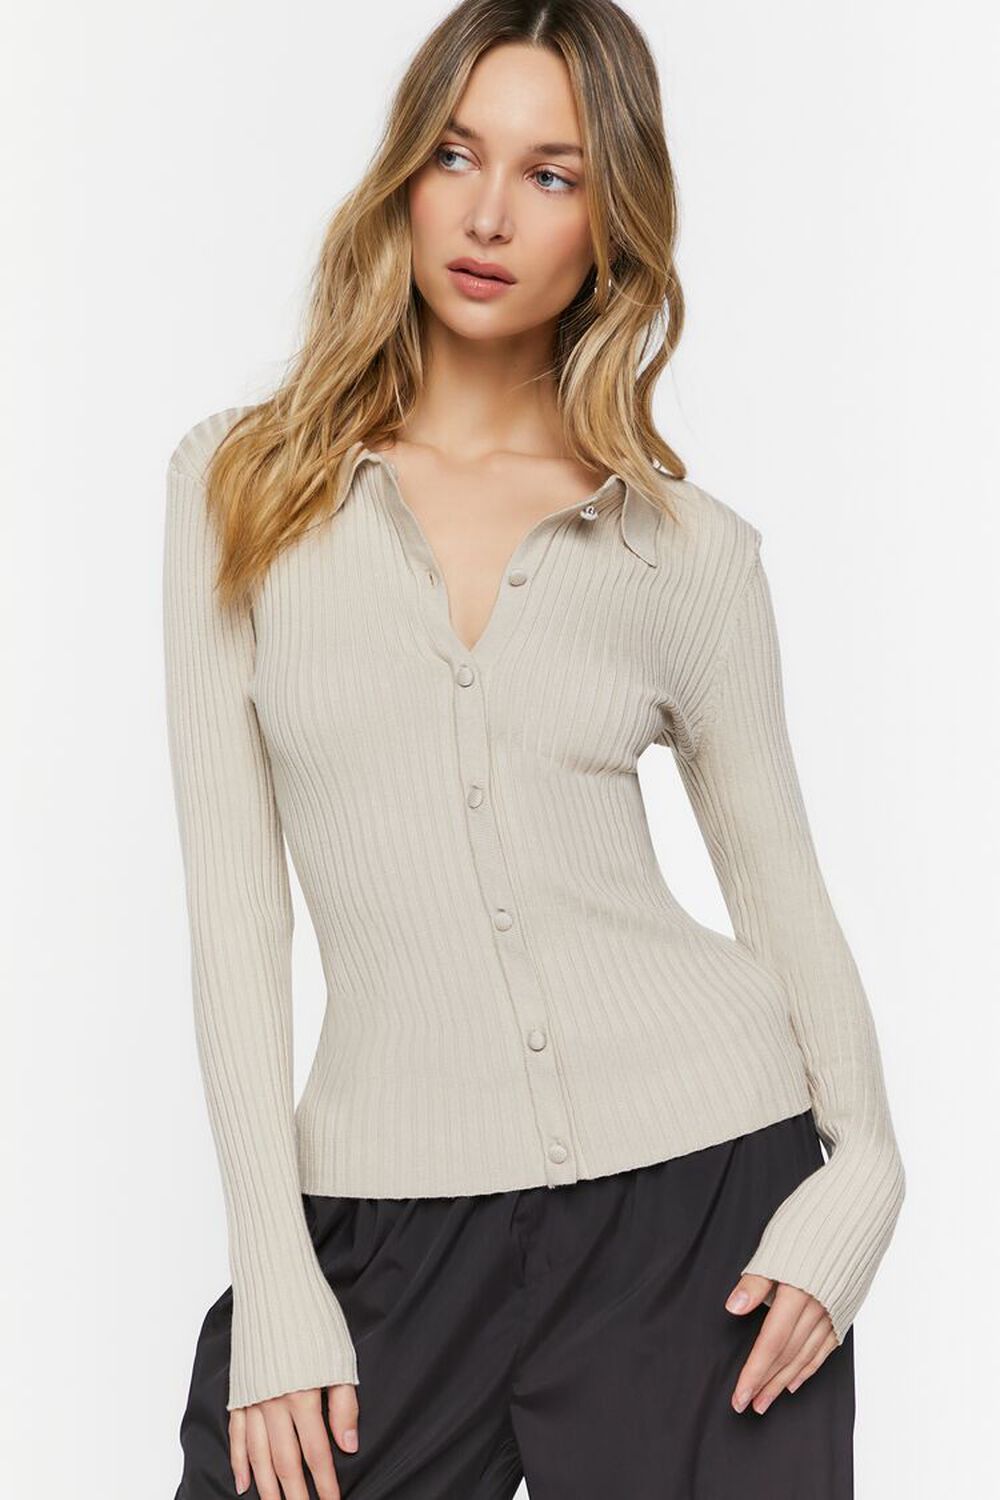 TAUPE Ribbed Knit Cardigan Sweater, image 1